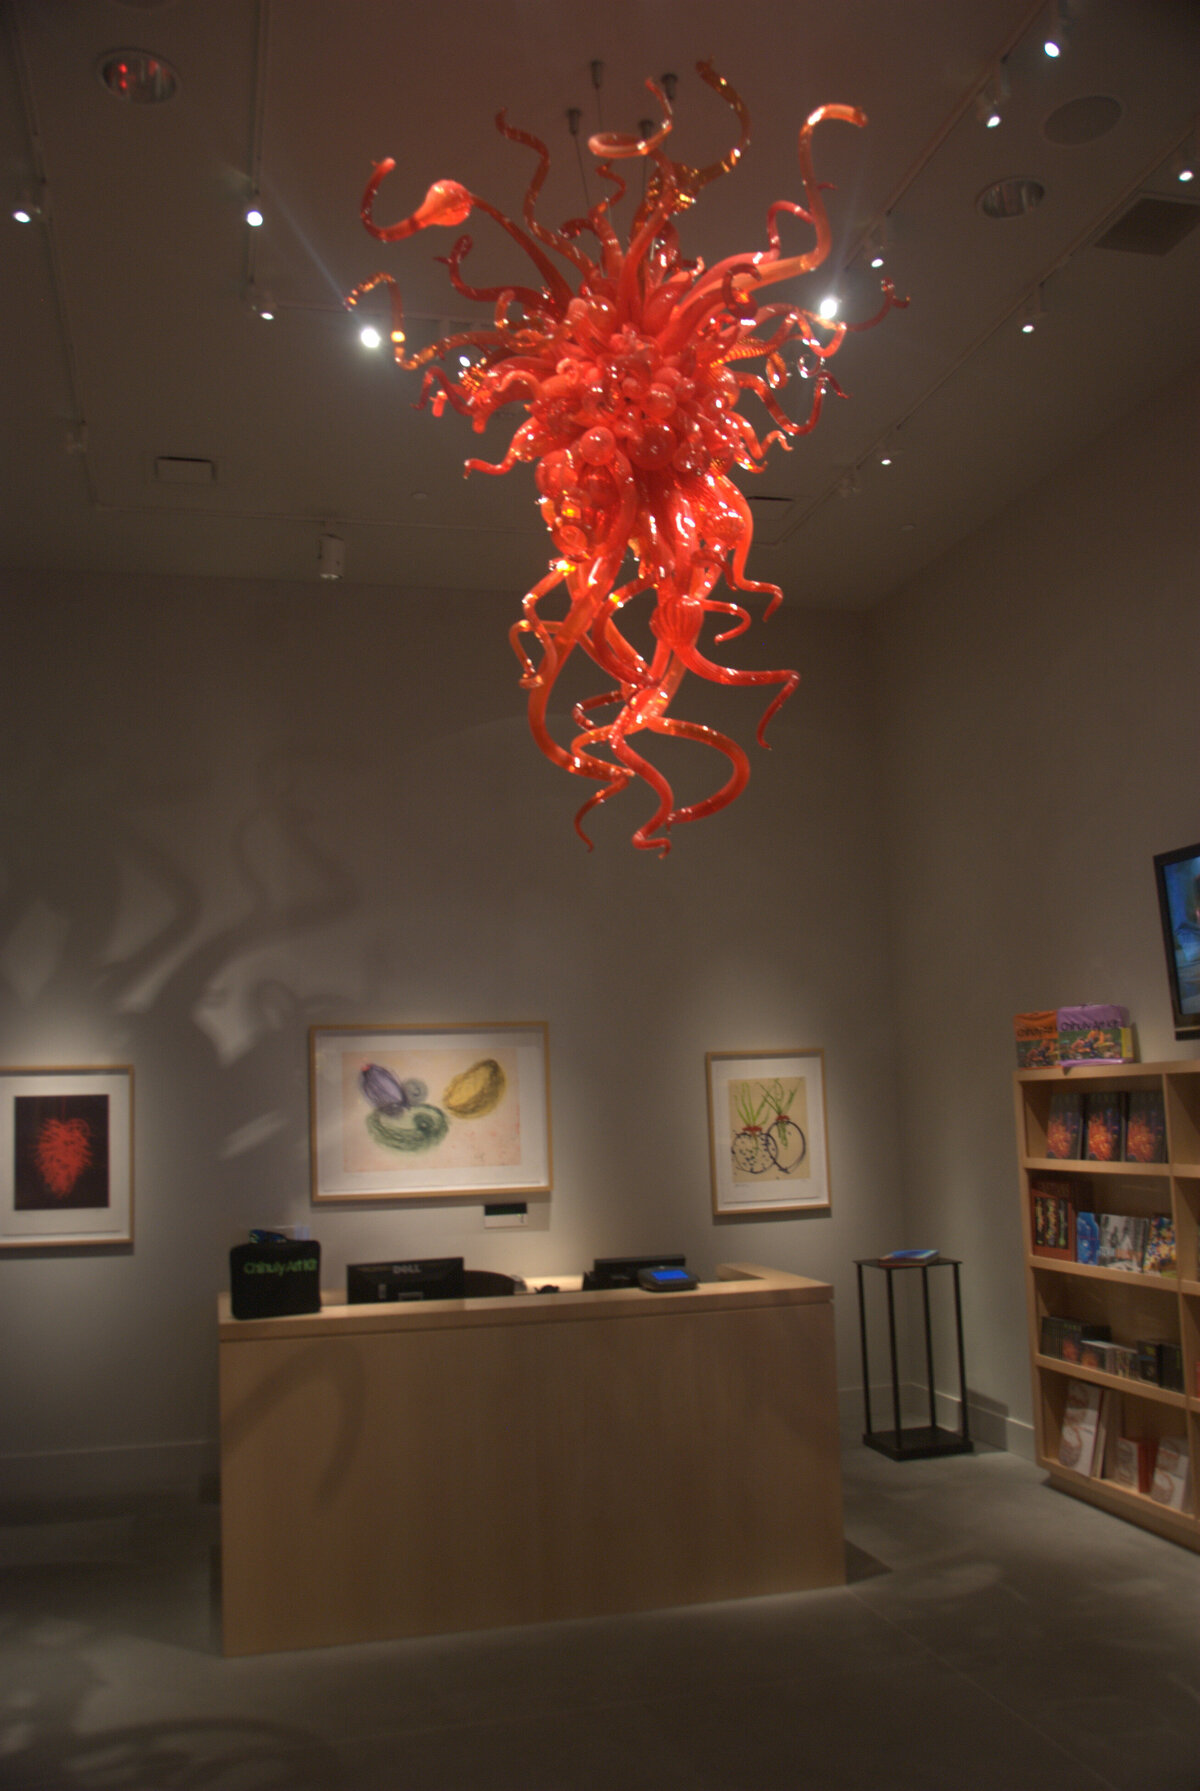 Discover the brilliance of Dale Chihuly's glass art at the Exhibition. Immerse yourself in vibrant colors and intricate designs.